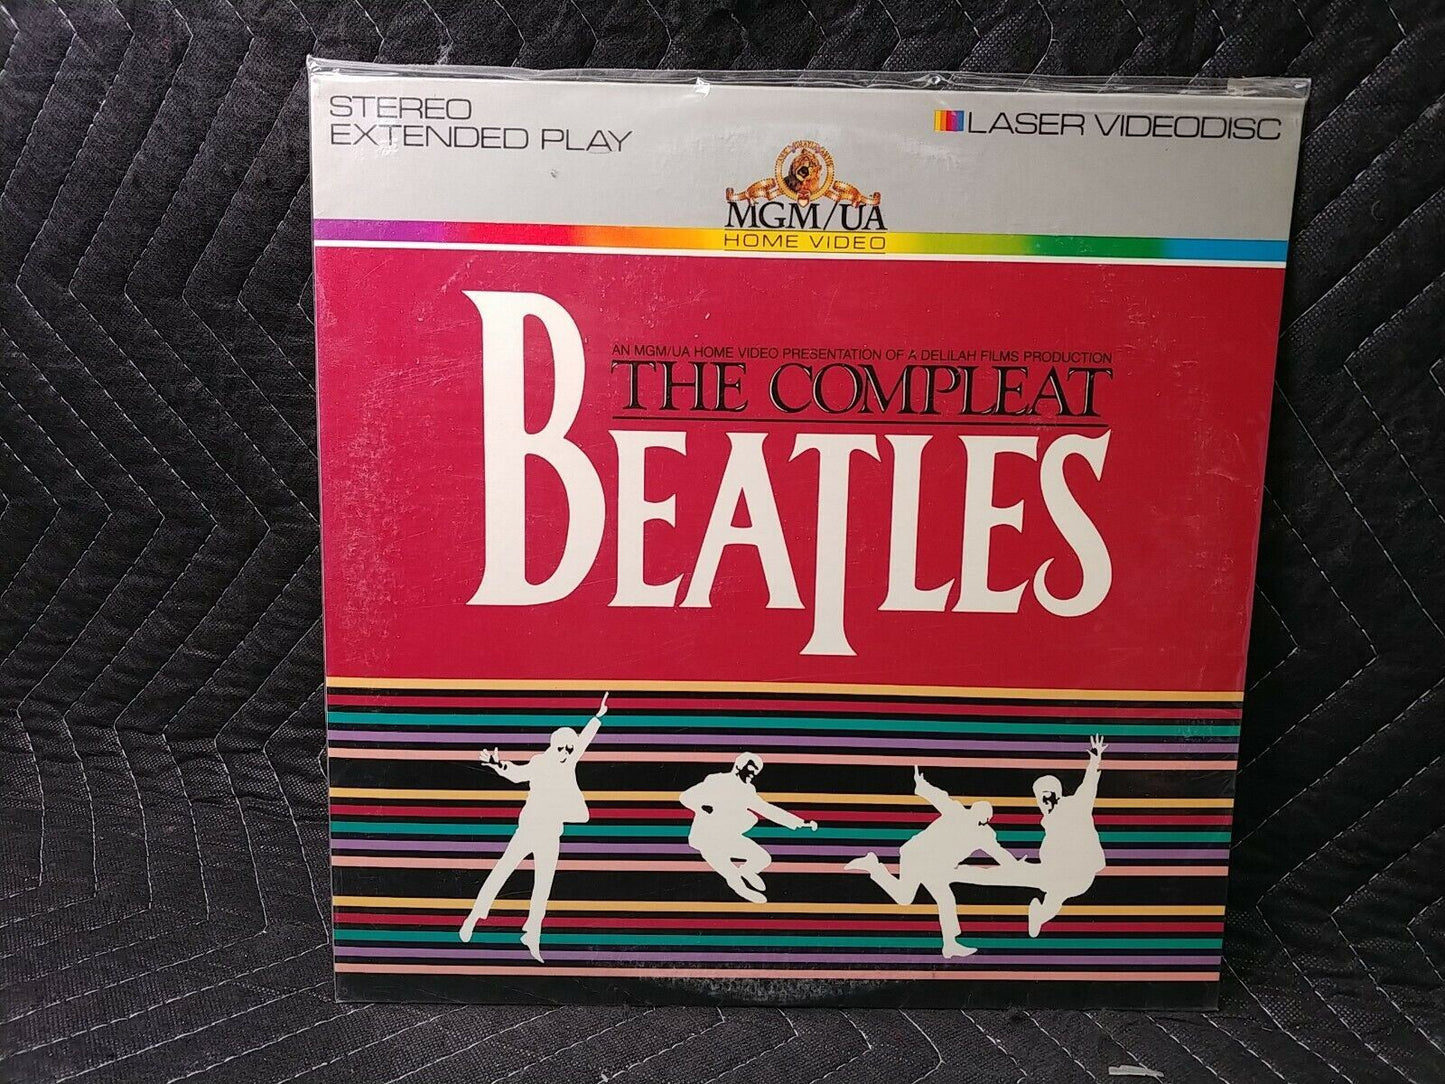 The Beatles ~ The Complete Beatles | Original 1982 CED Laser Disc -